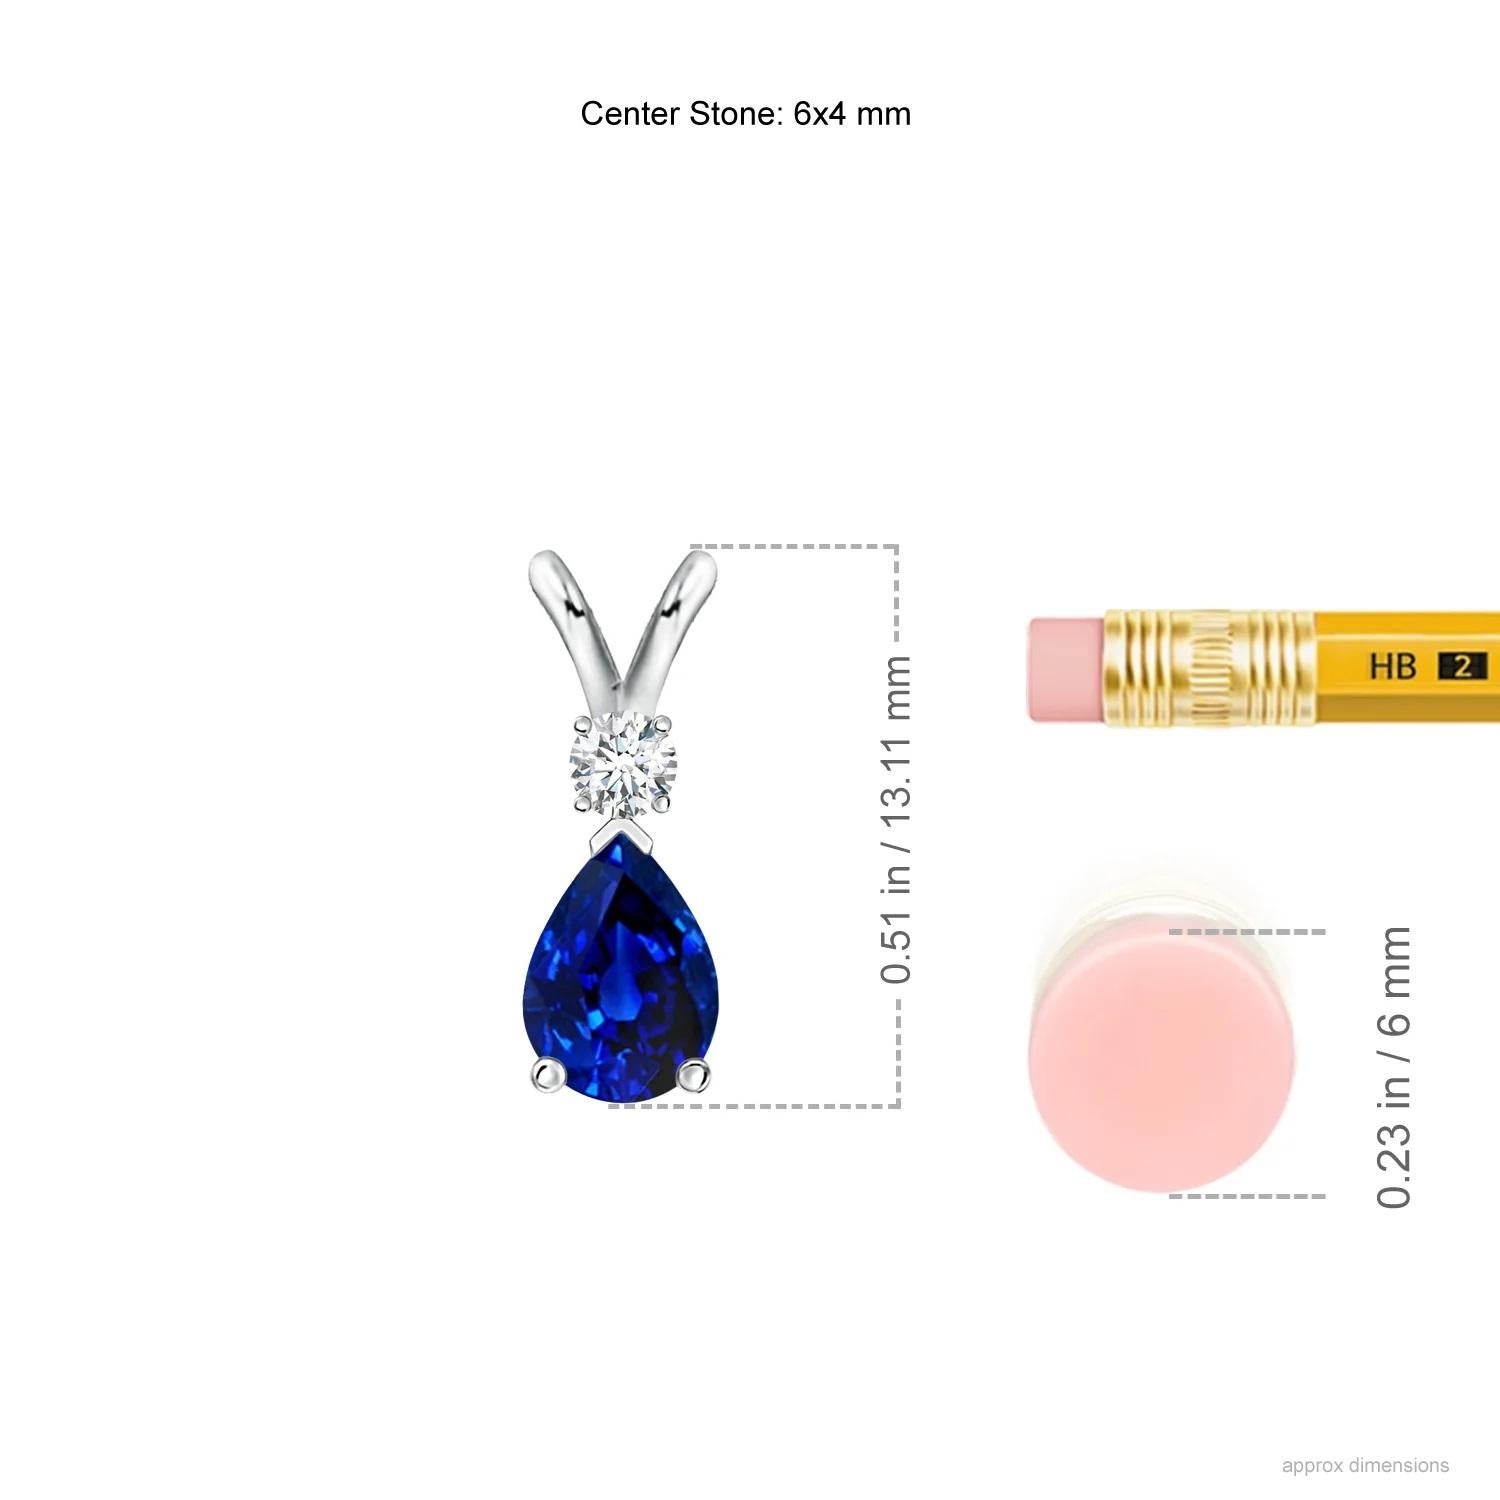 This classic solitaire pendant features a pear-shaped sapphire secured in a prong setting. A brilliant round diamond sits atop the blue gemstone adding to the design's charm. Simple yet appealing, this sapphire pendant in 14k white gold is crafted